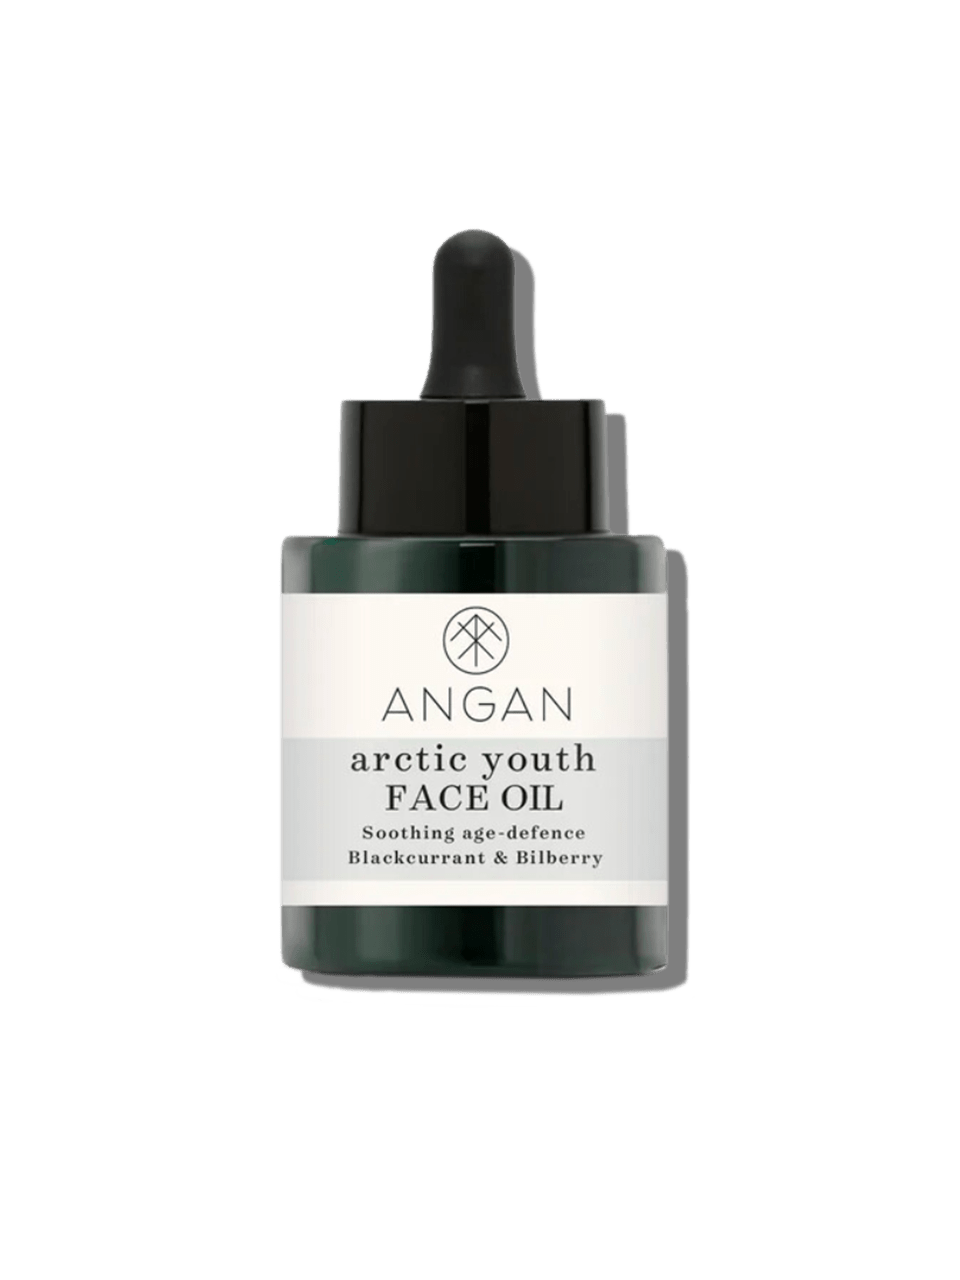 Arctic Youth Face Oil SKINCARE ANGAN 